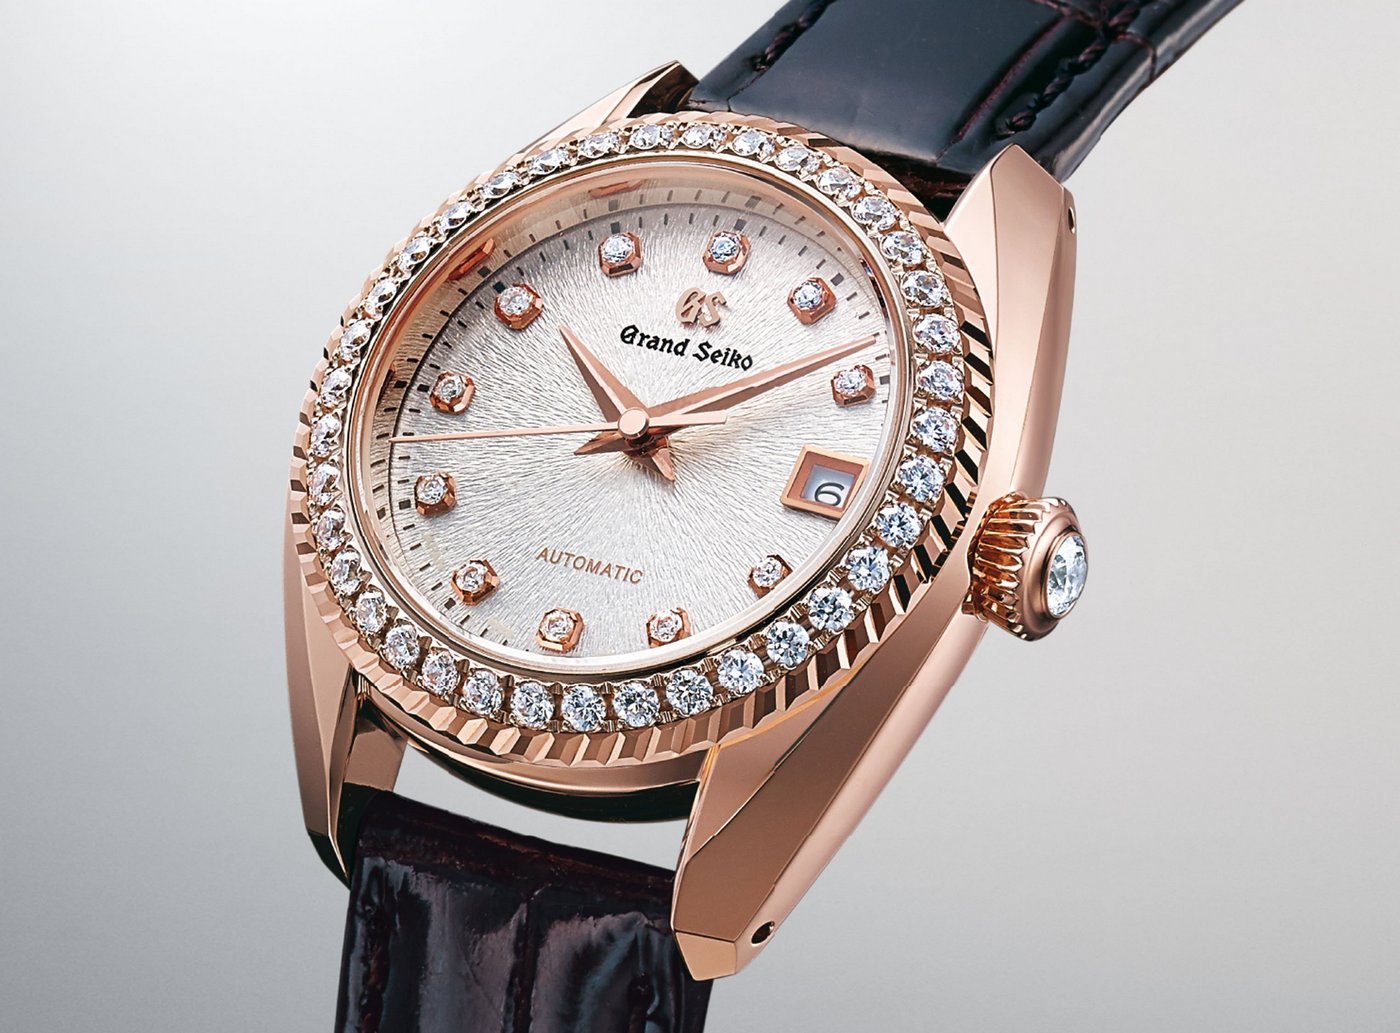 Grand Seiko launches the Caliber 9S25, an exclusive new timepiece for women  - Luxurylaunches